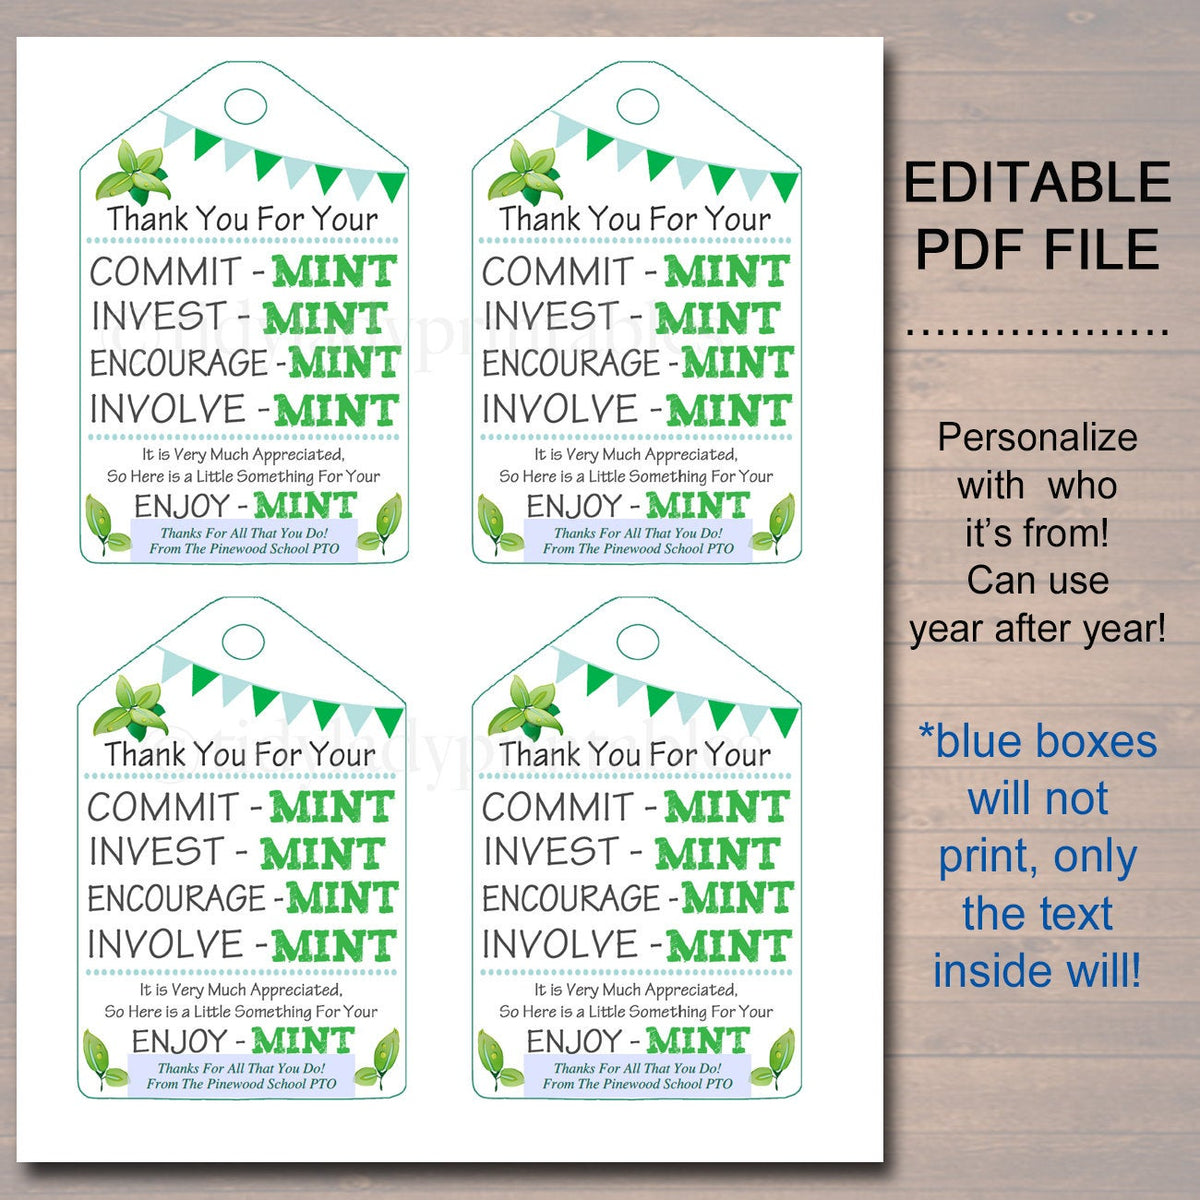 printable-thank-you-tags-volunteer-mint-labels-printable-instant